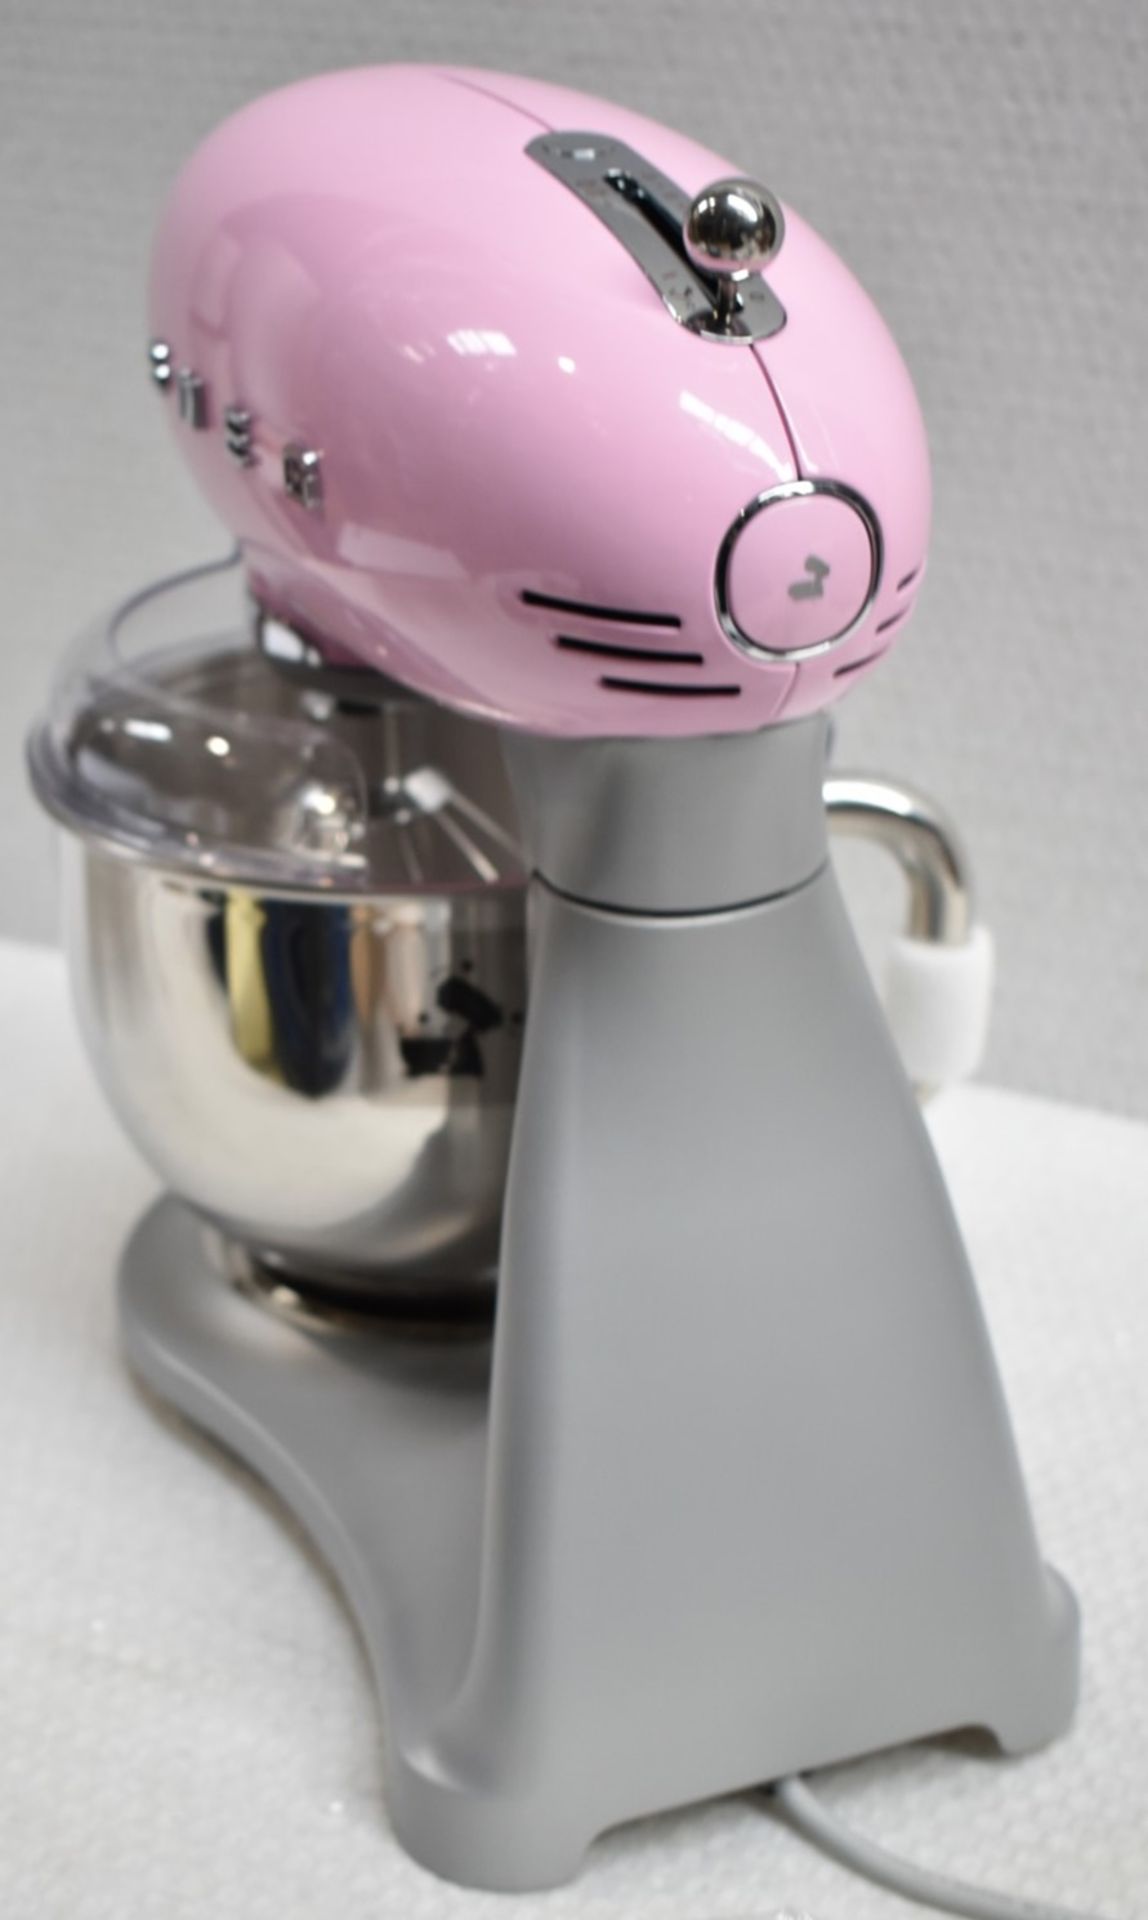 1 x SMEG 50s Style Stainless Steel Stand Mixer In Pale Pink (4.8L) - Original Price £449.00 - Image 6 of 16